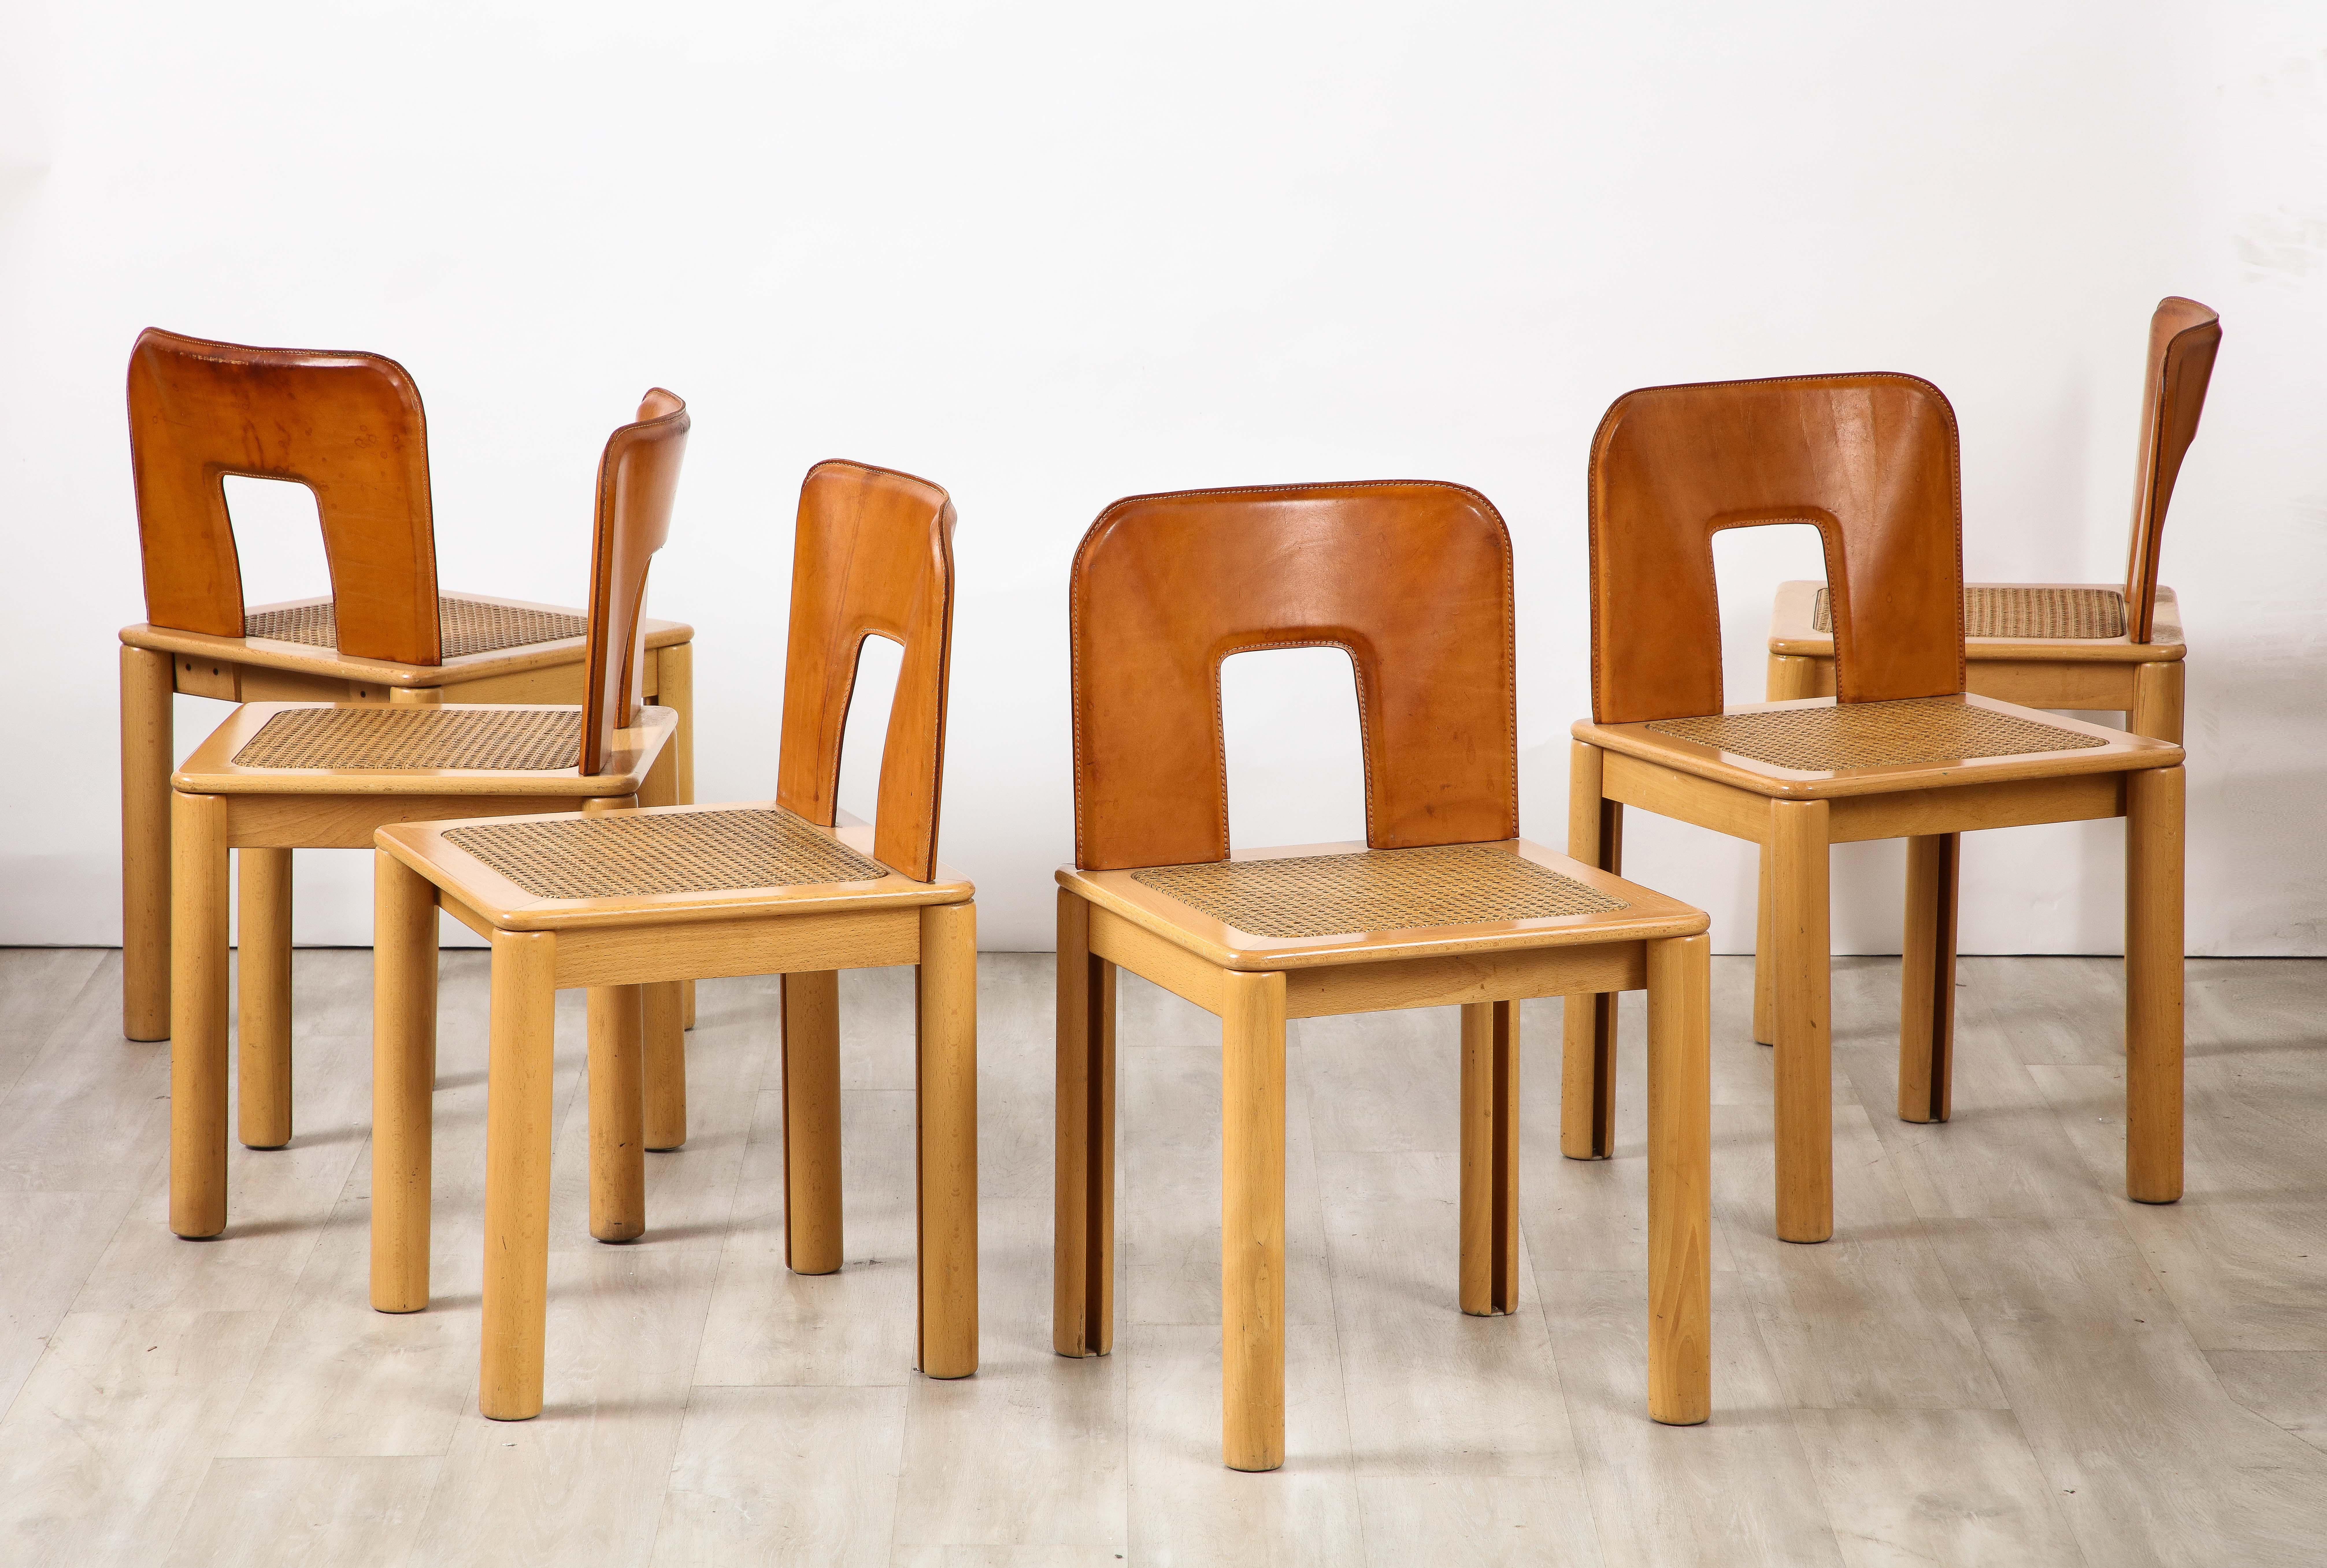 Italian 1970's Dining Chairs with Leather, Wood, Cane Seats, Italy, circa 1970 In Good Condition For Sale In New York, NY